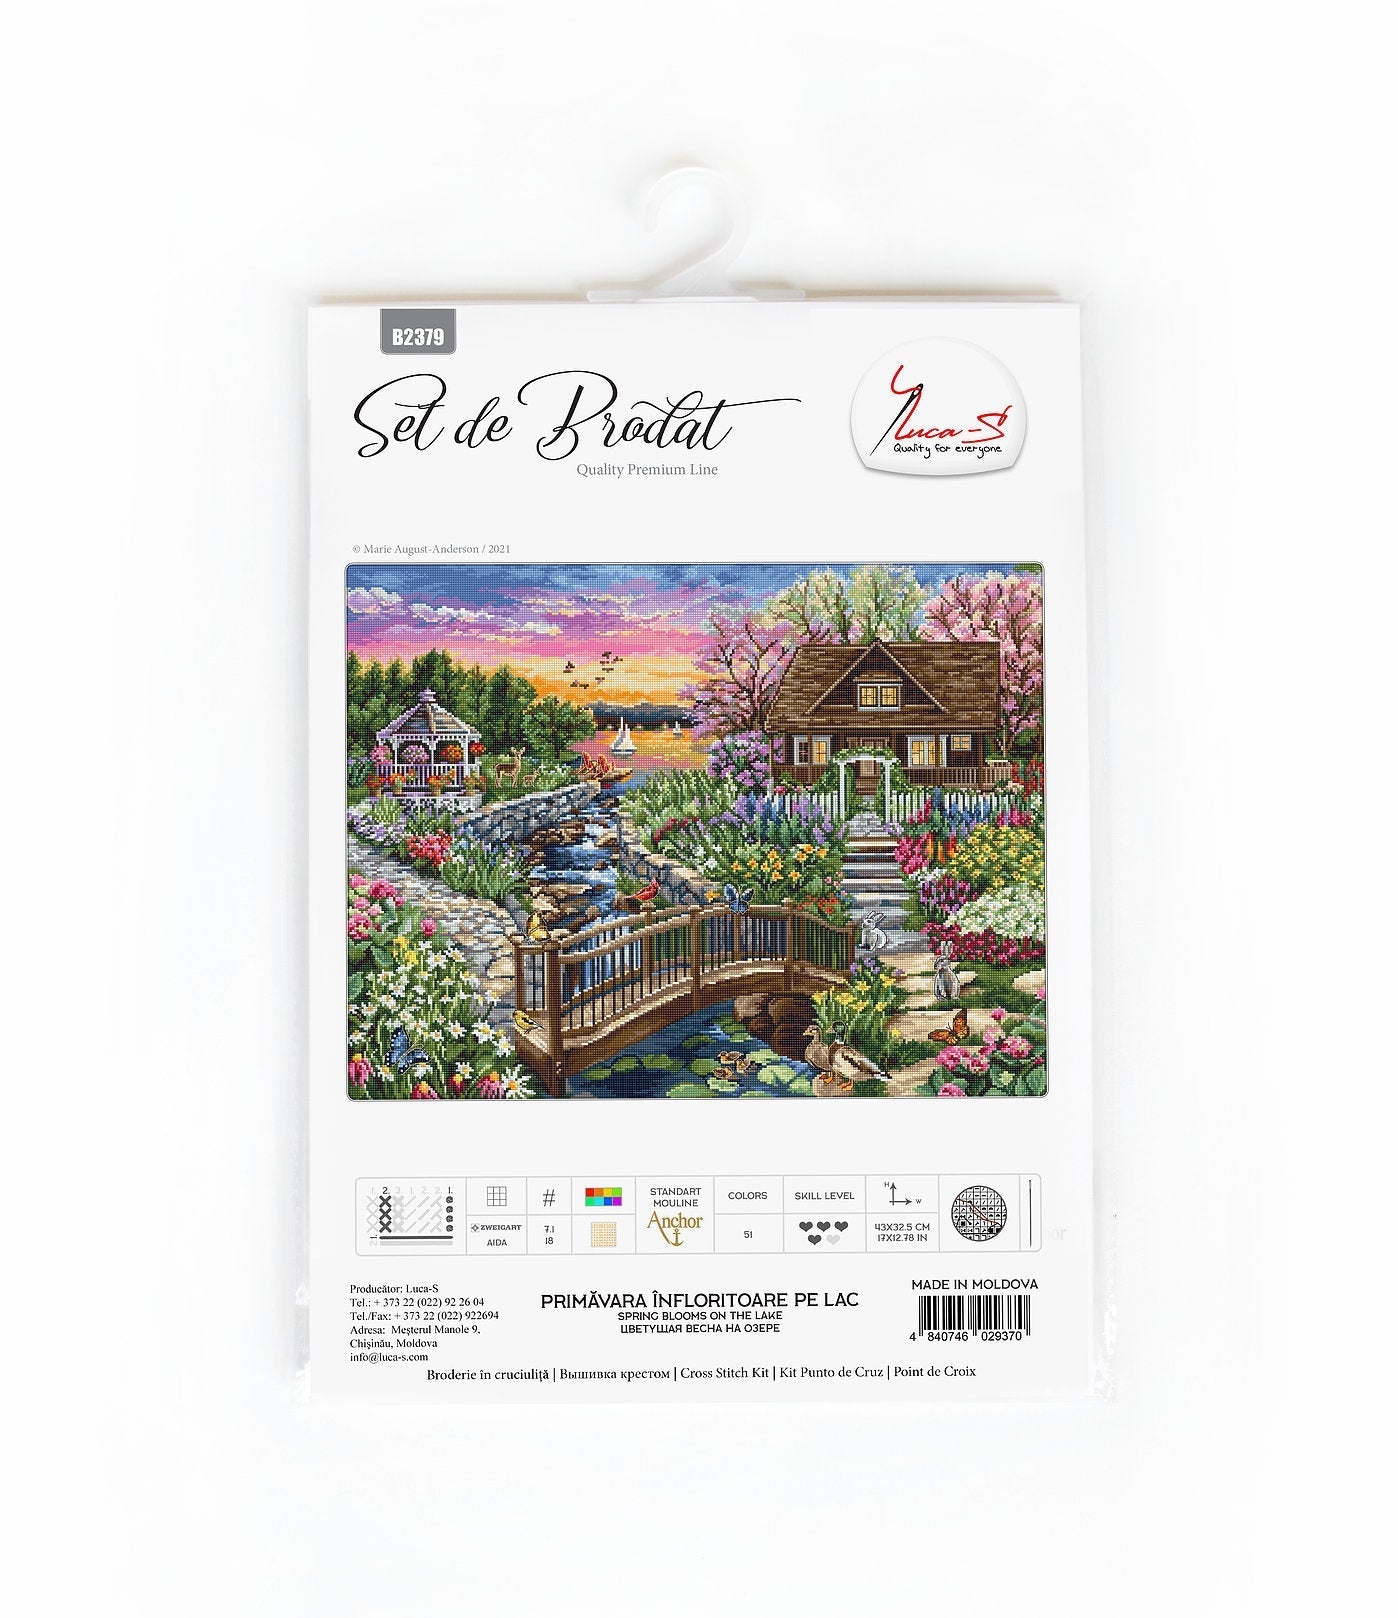 Cross Stitch Kit Luca-S - Spring Blooms on the Lake - HobbyJobby